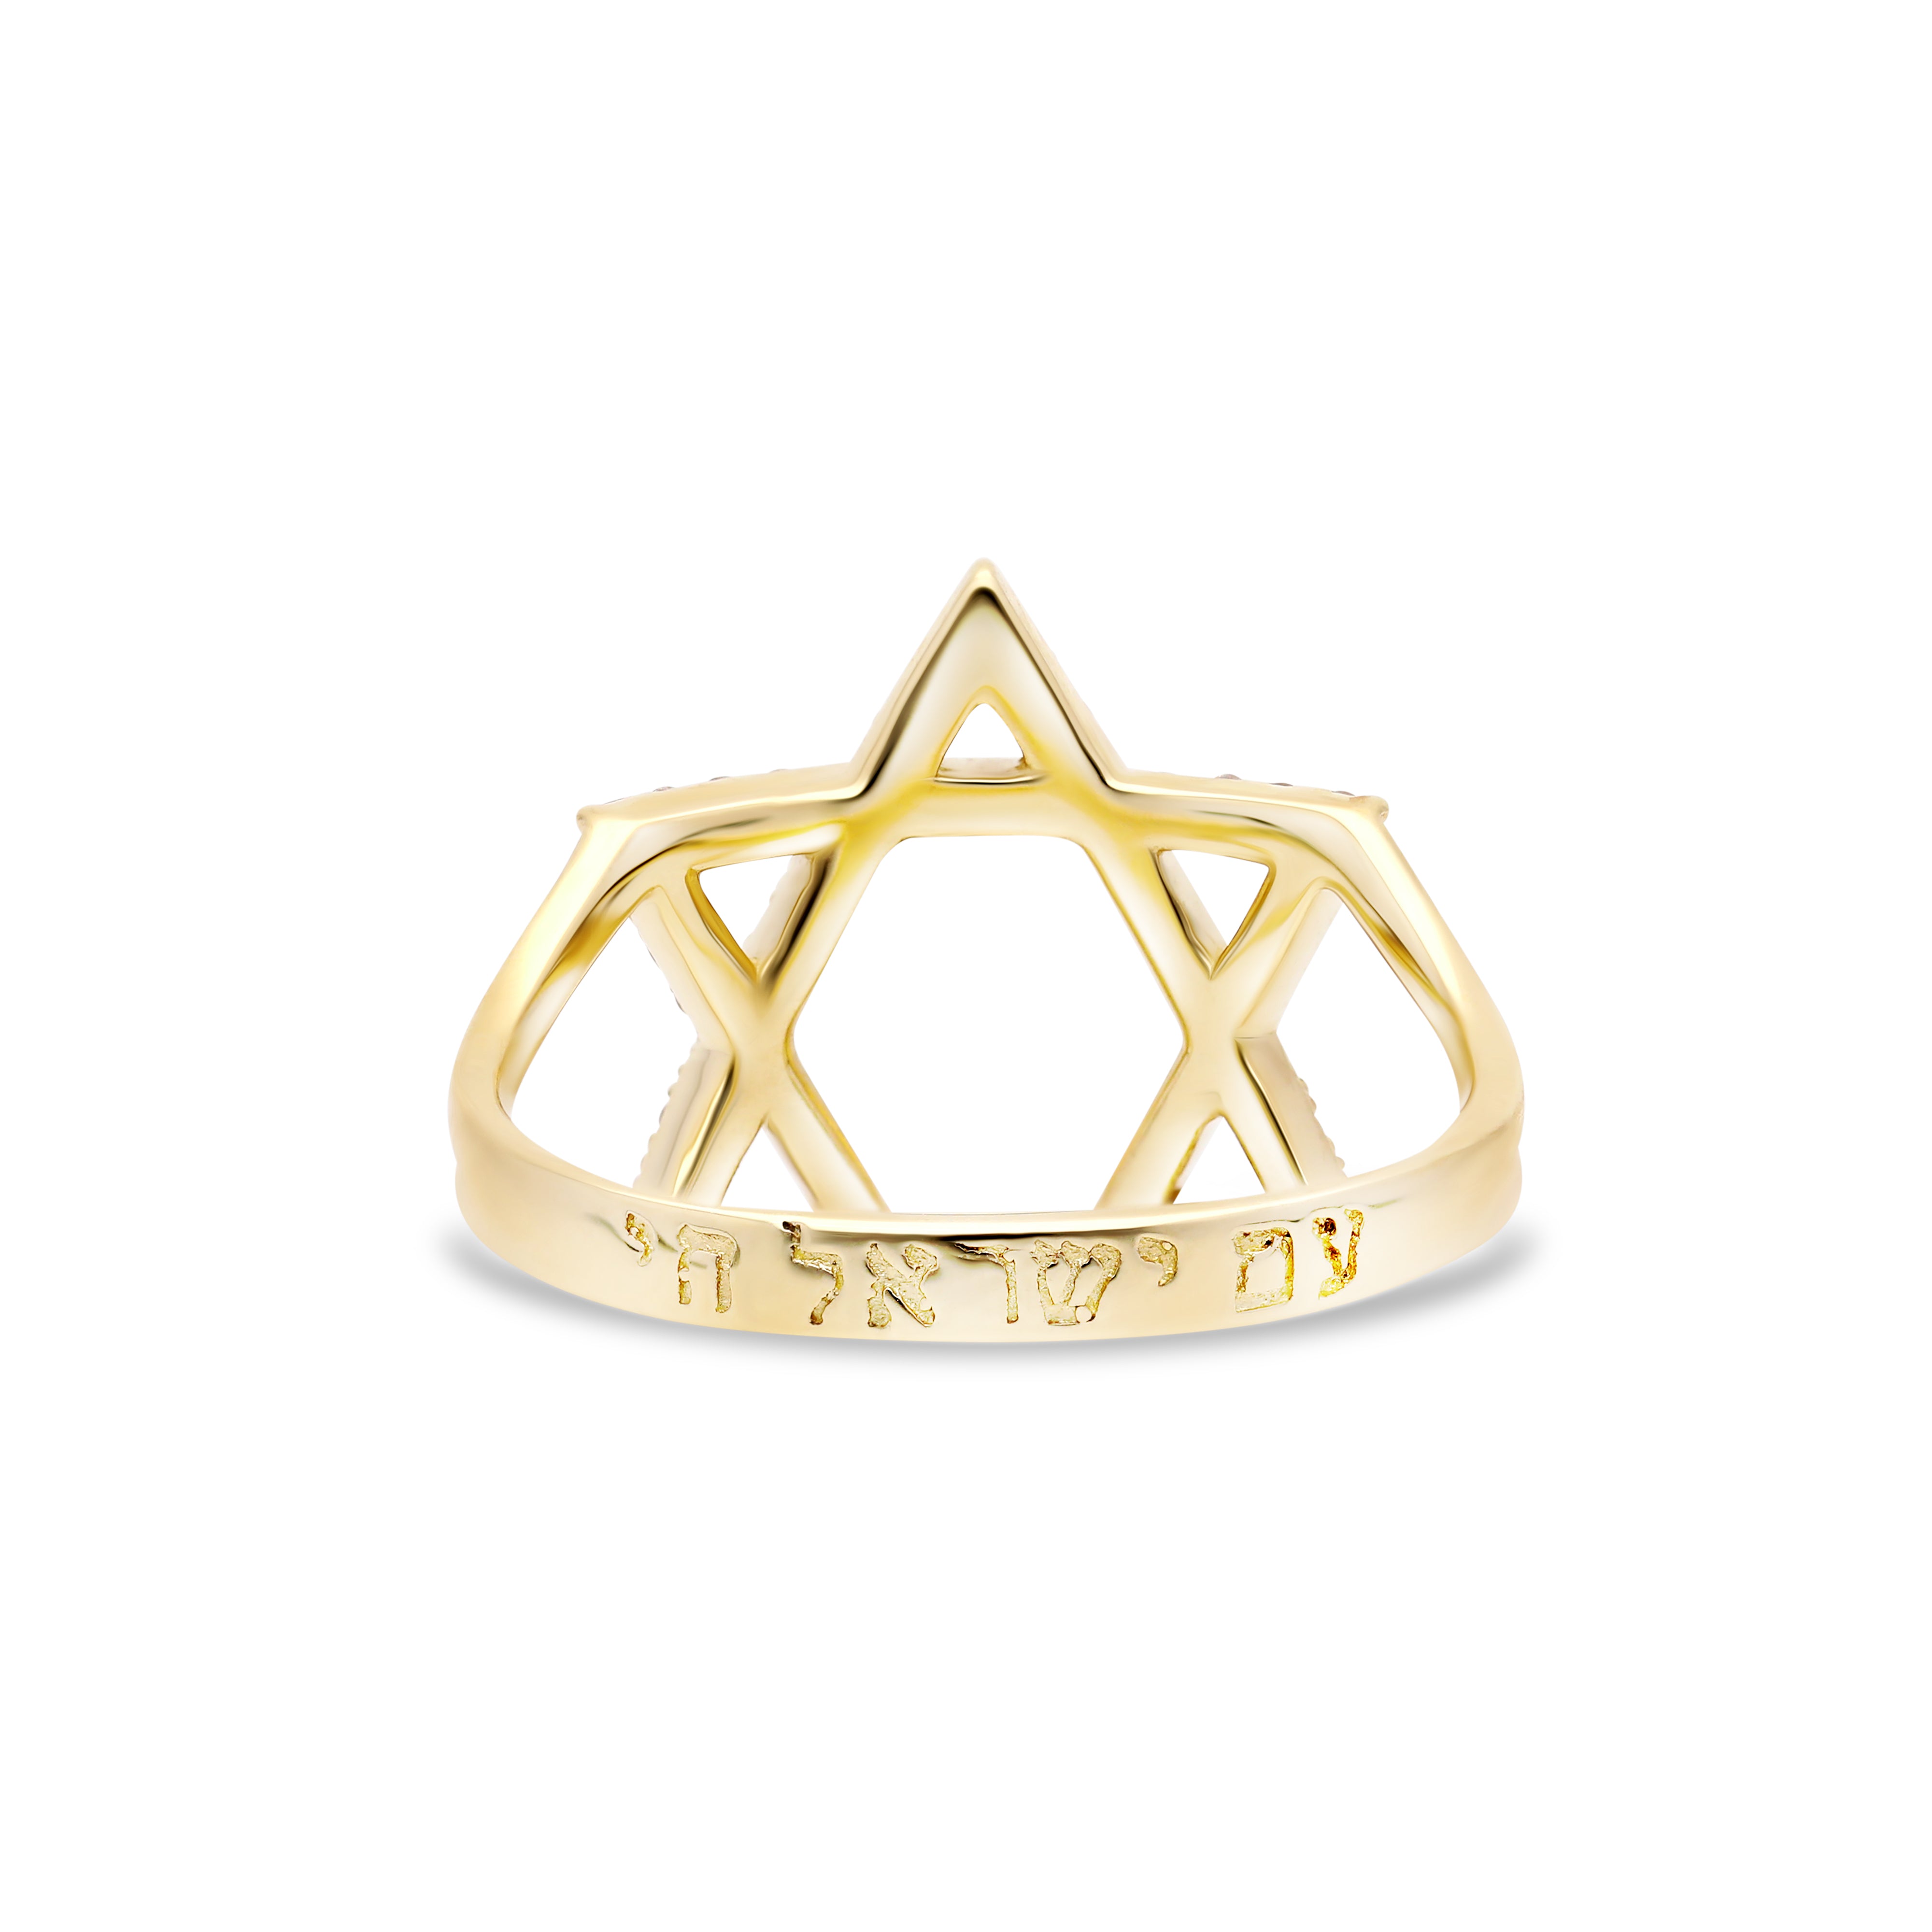 The All Gold Mazel Ring